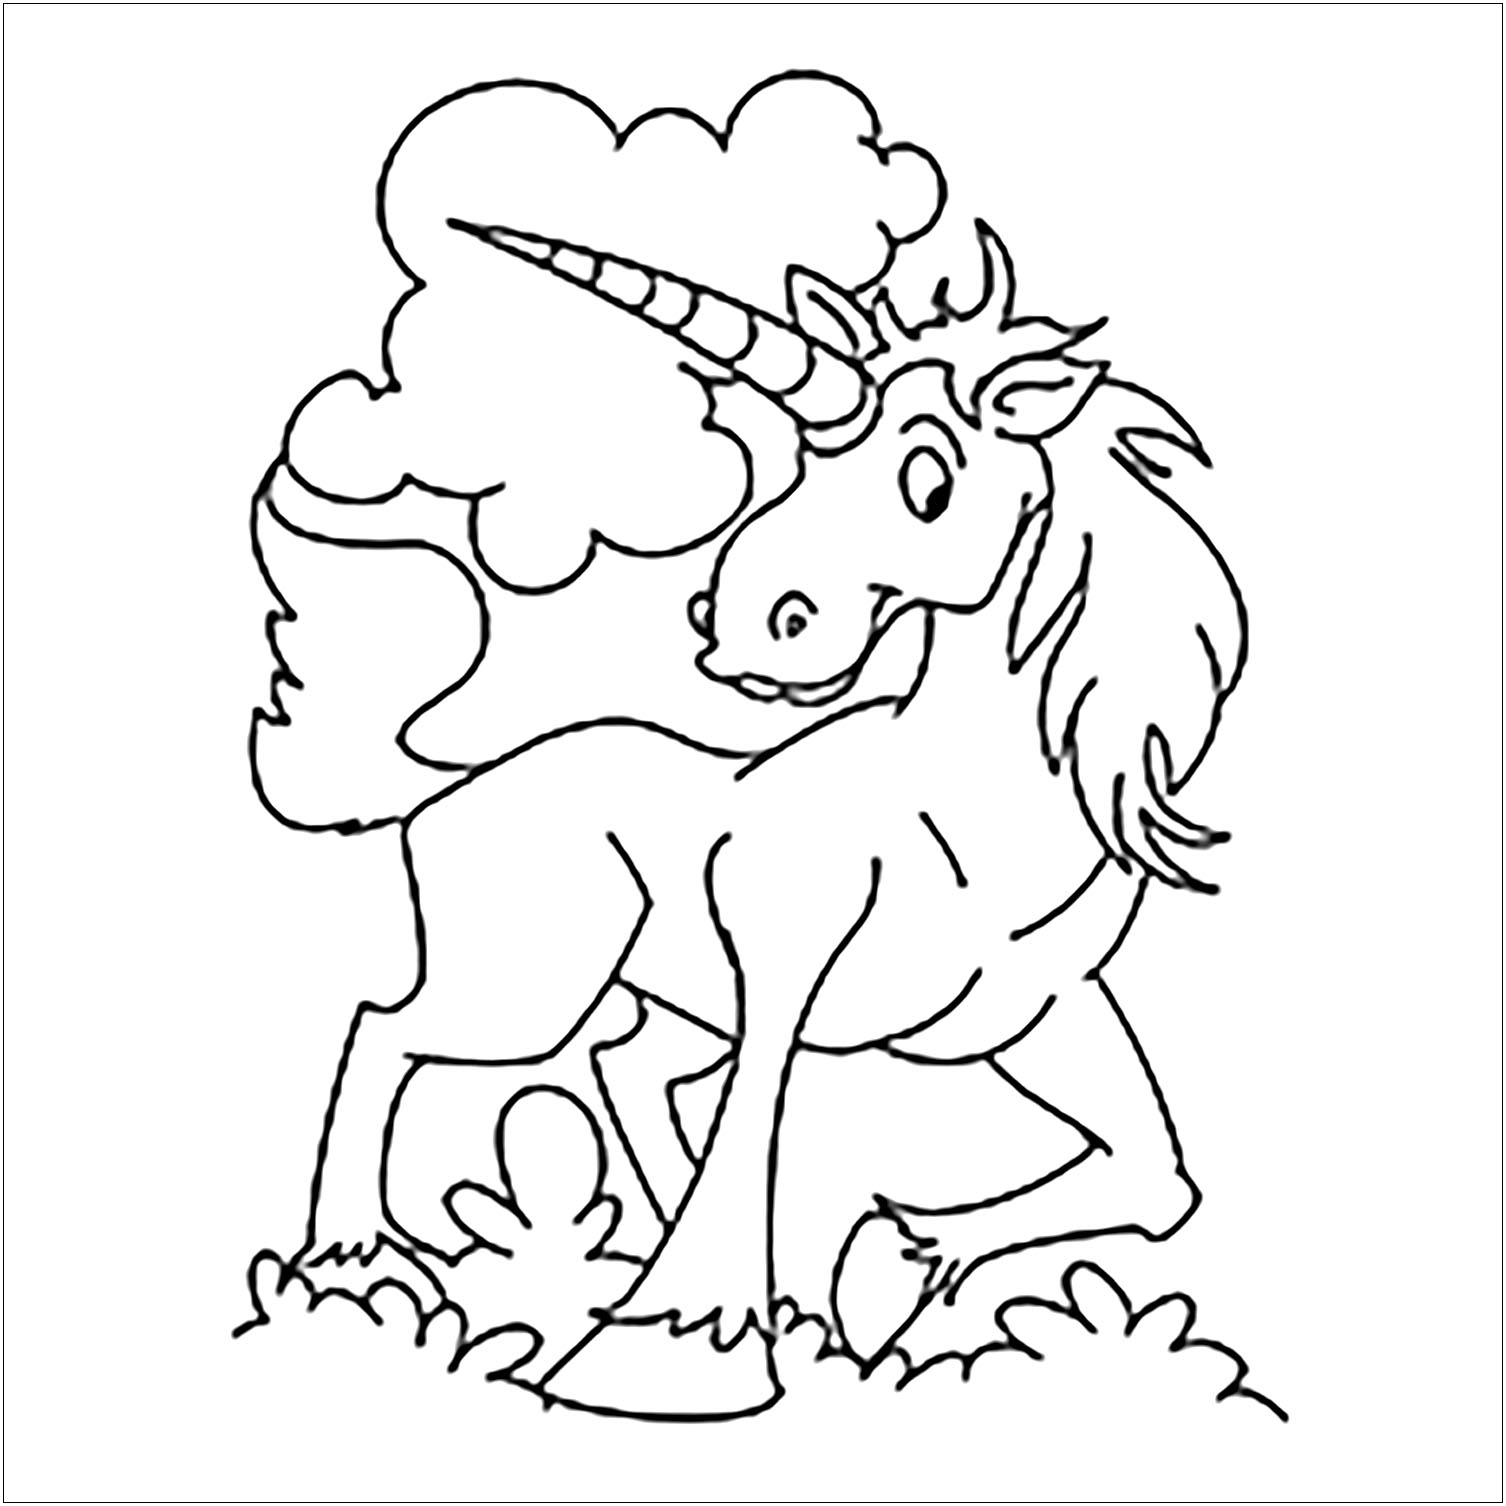 Simple unicorn coloring pages